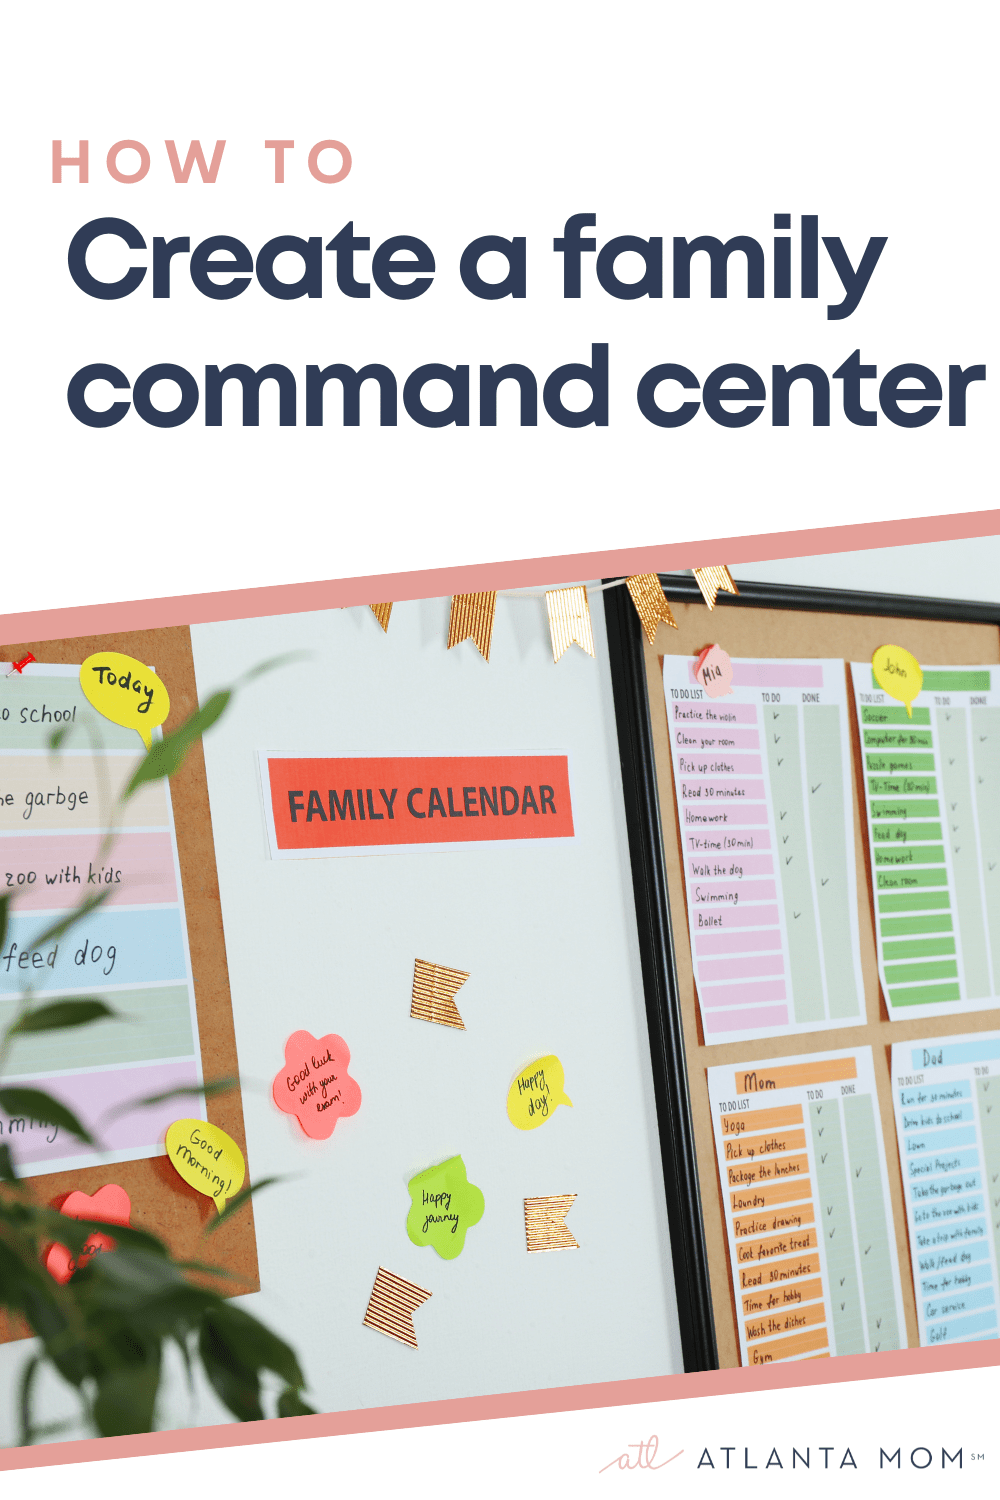 Creating a family command center